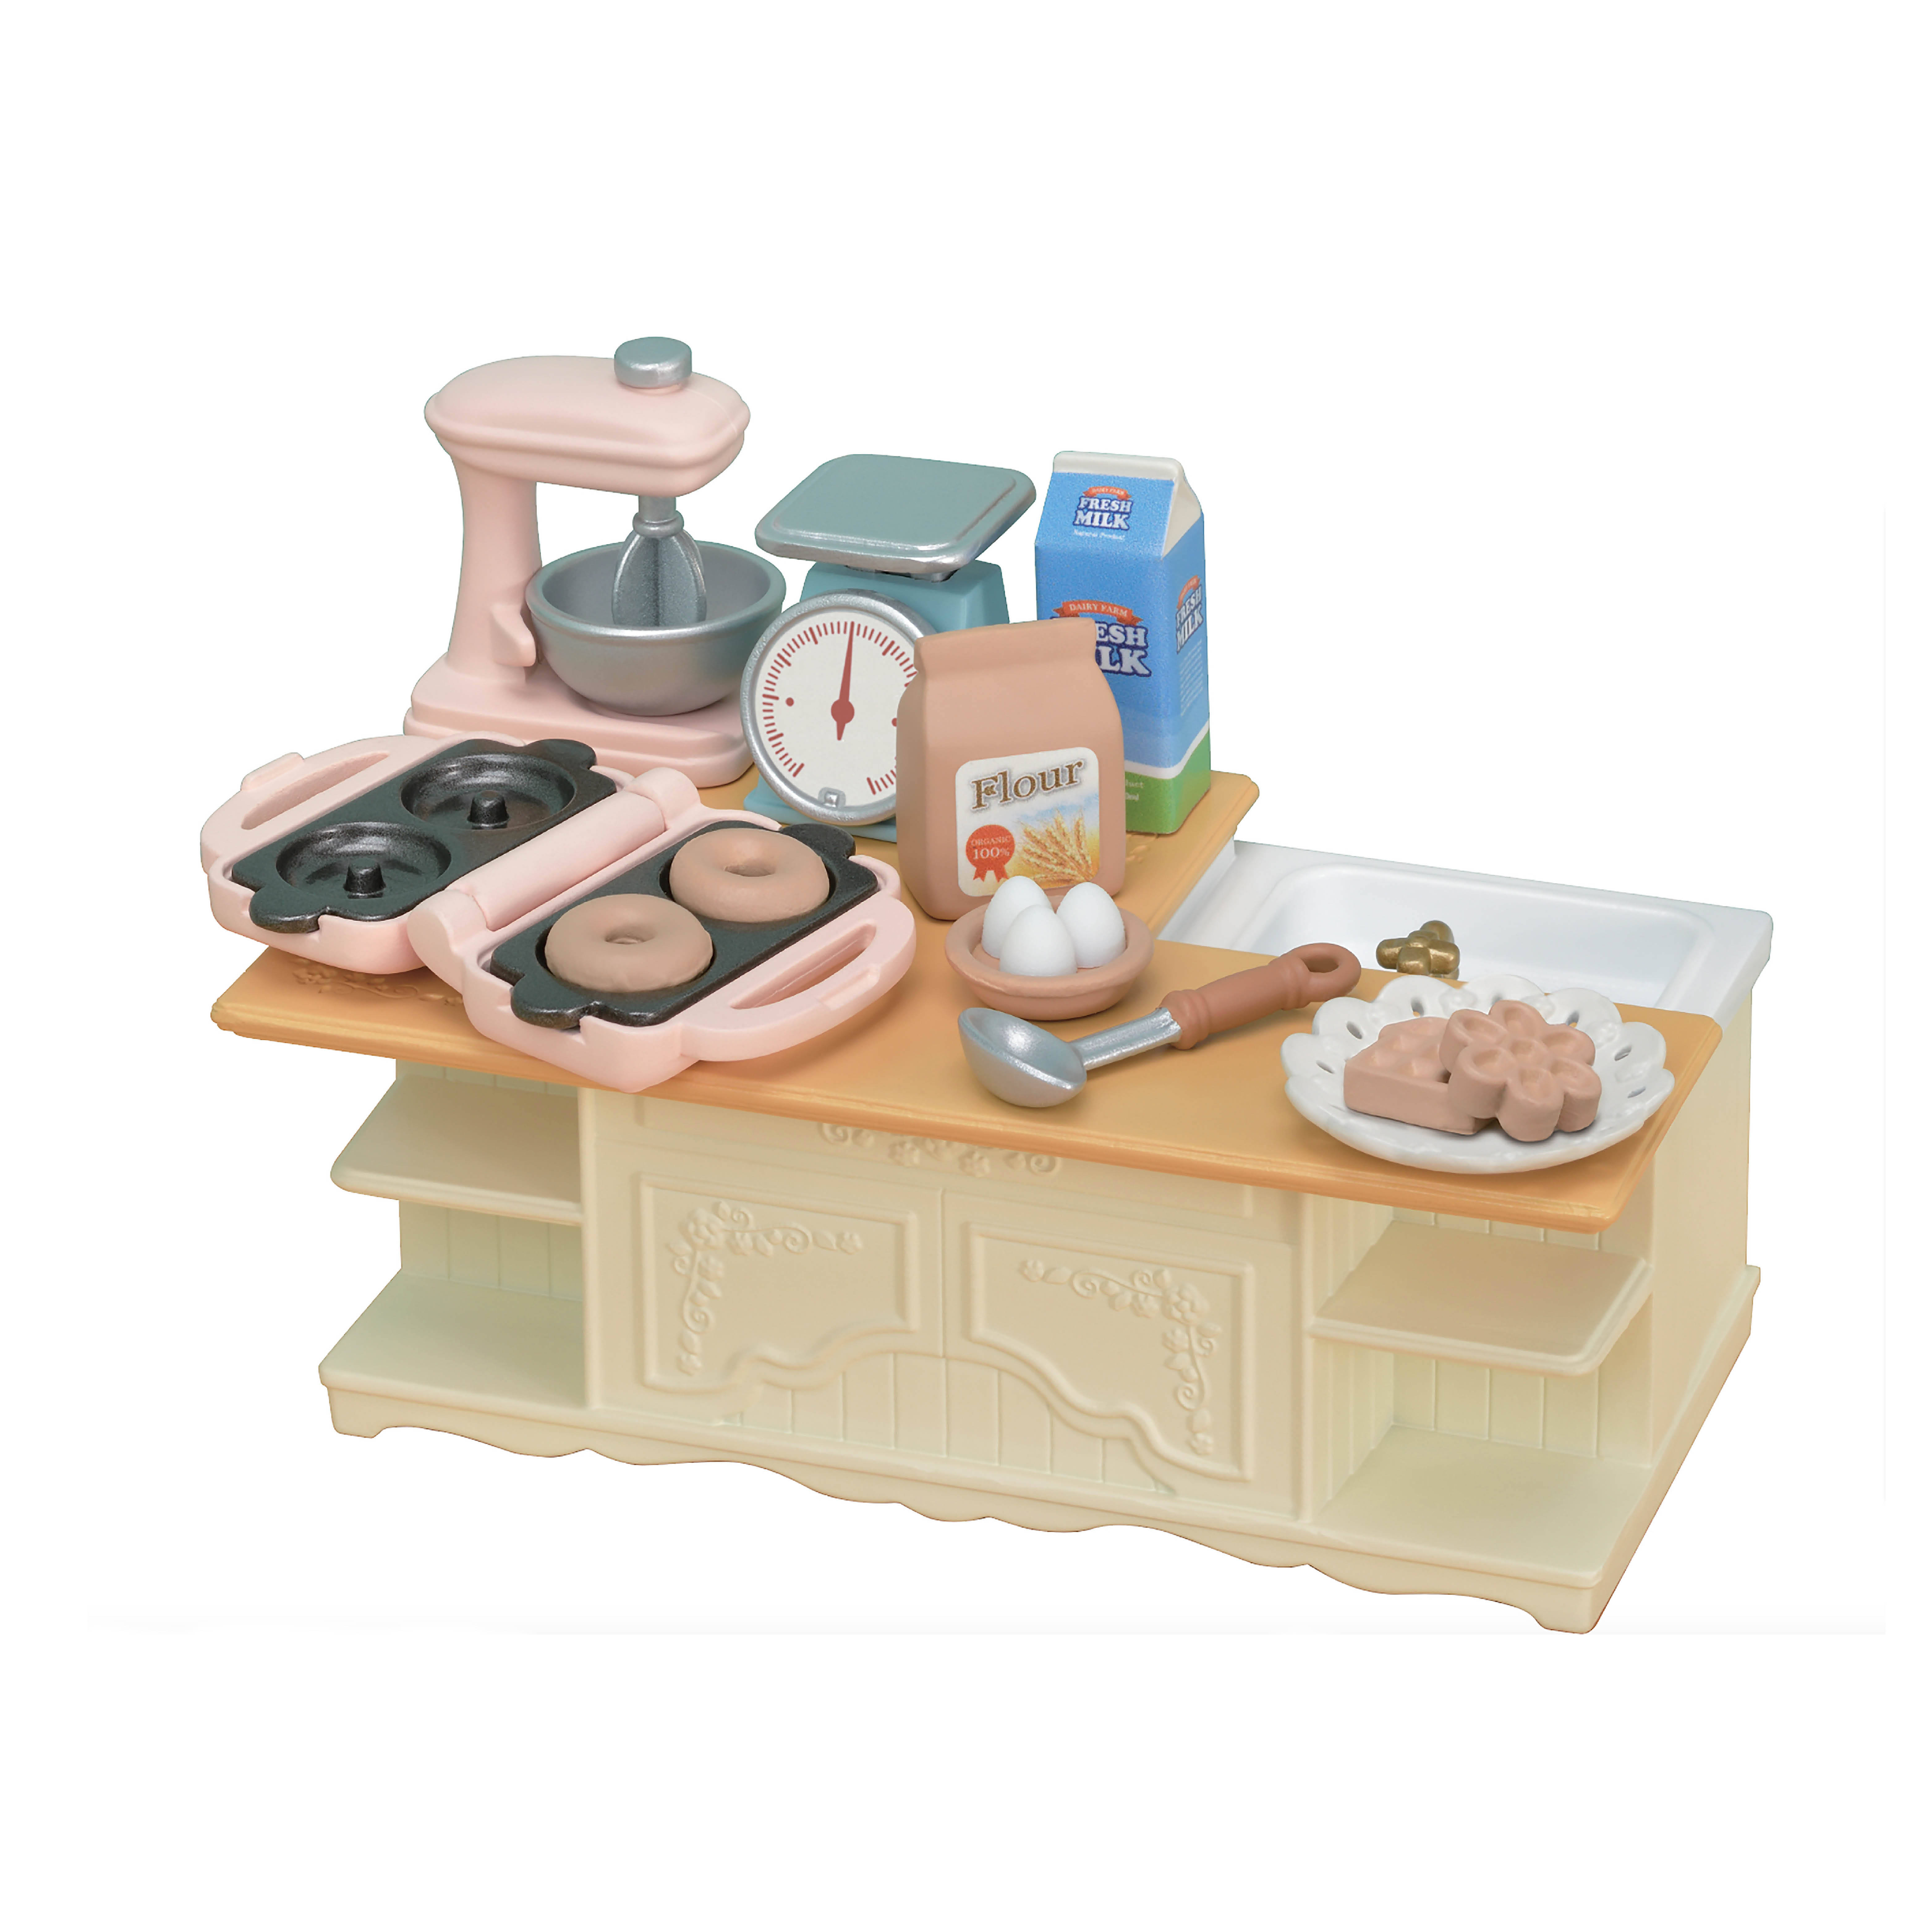 Calico Critters Kitchen Island, Dollhouse Furniture and Accessories